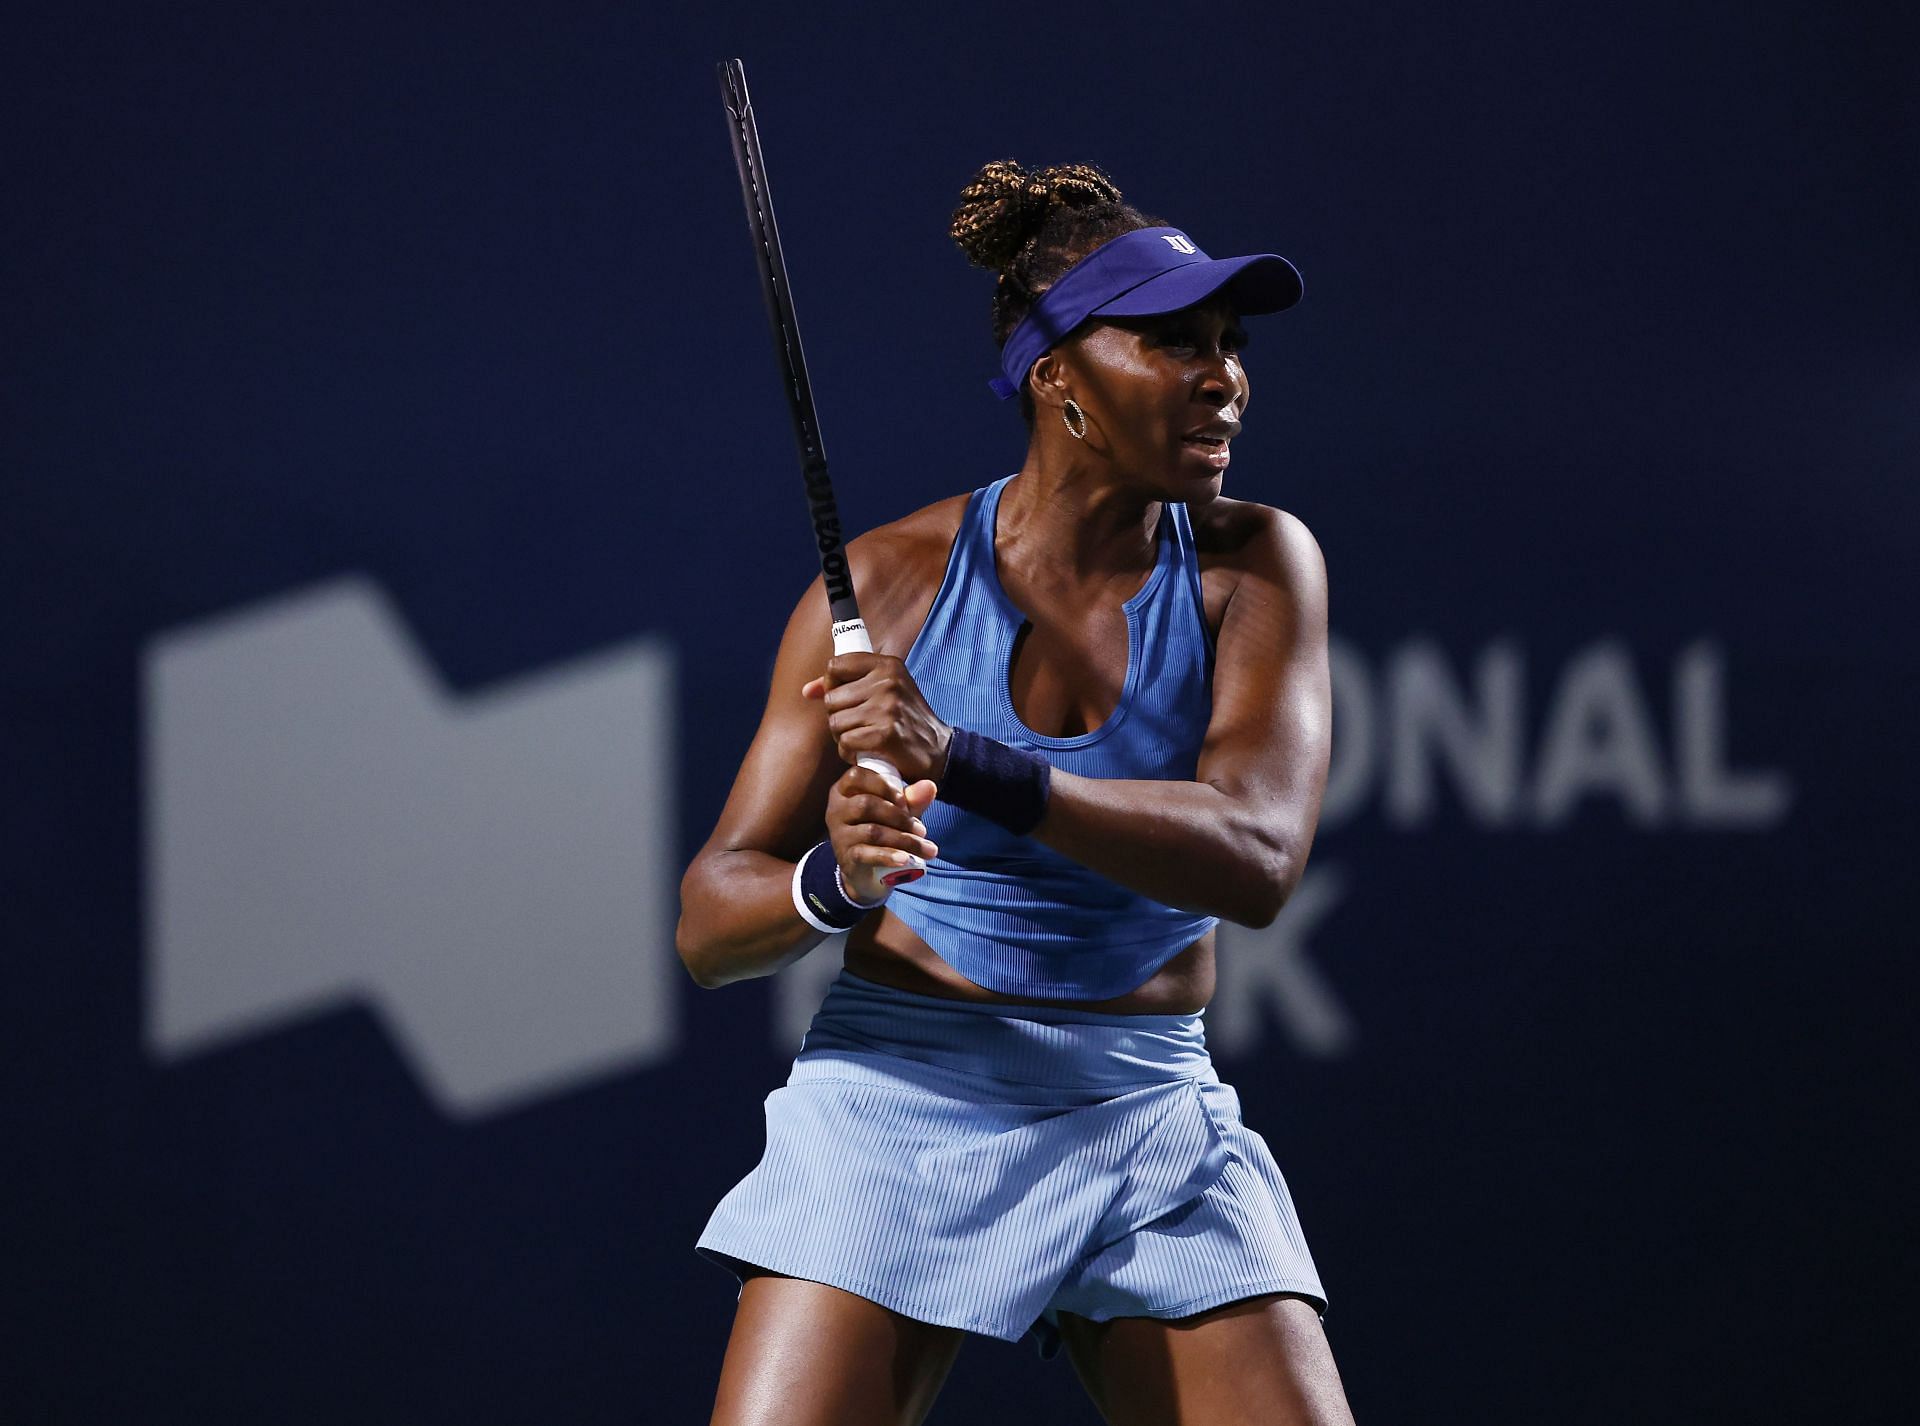 Venus Williams in action at the Canadian Open